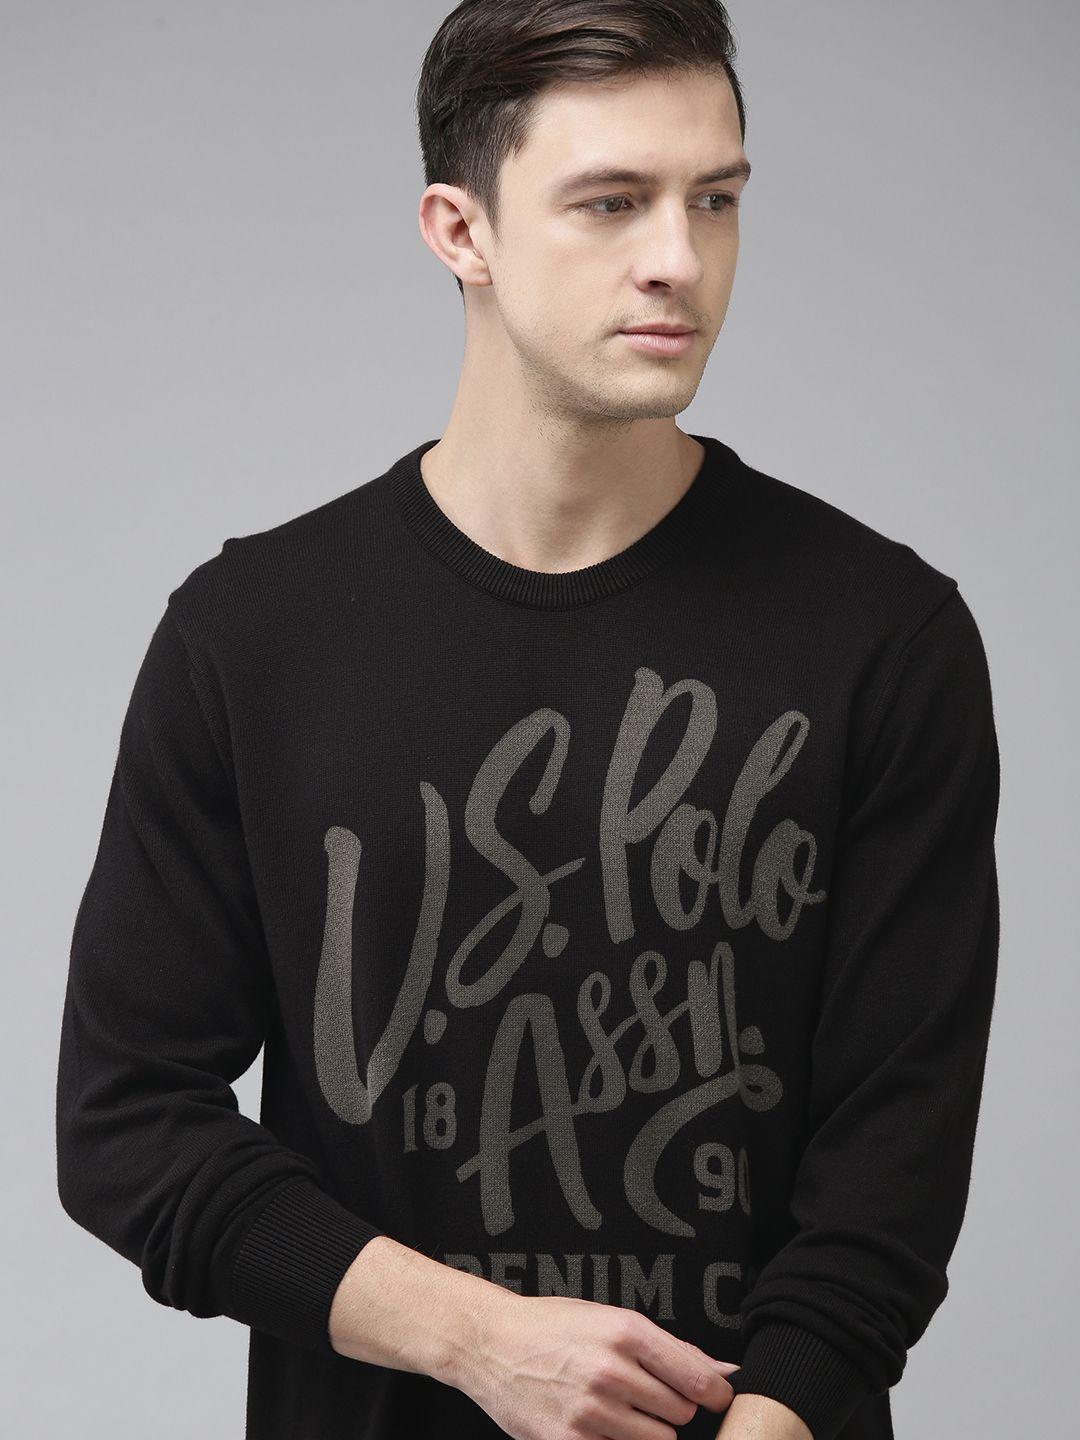 u-s-polo-assn-denim-co-men-black-&-grey-typography-printed-pullover-sweater